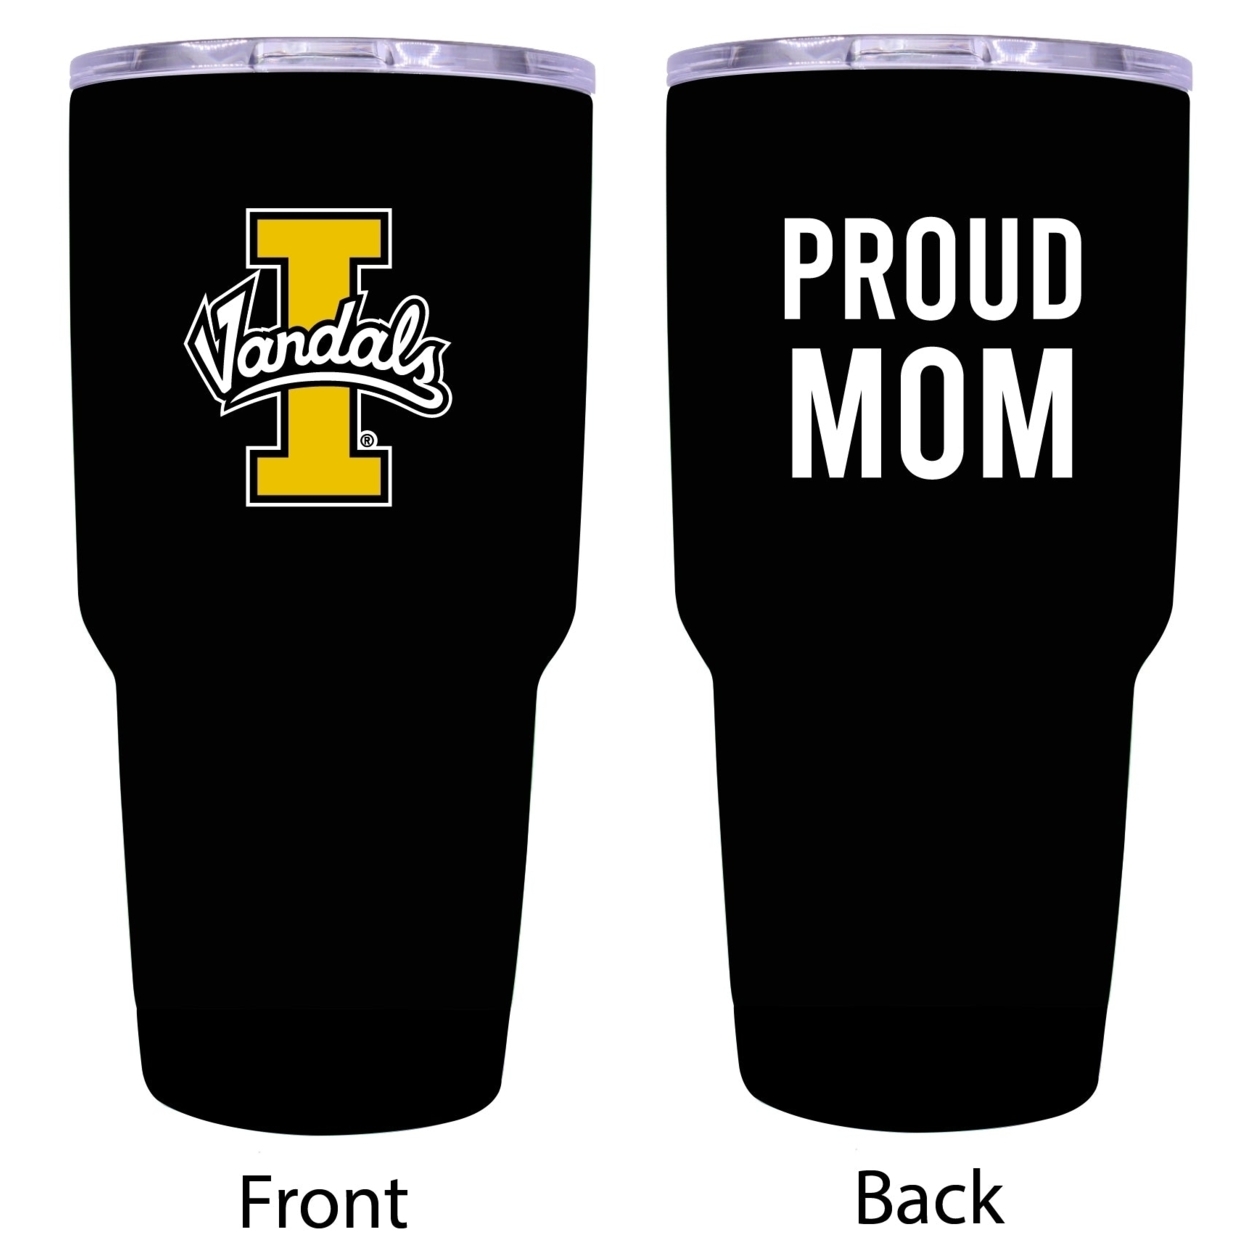 R And R Imports Idaho Vandals Proud Mom 24 Oz Insulated Stainless Steel Tumblers Black.